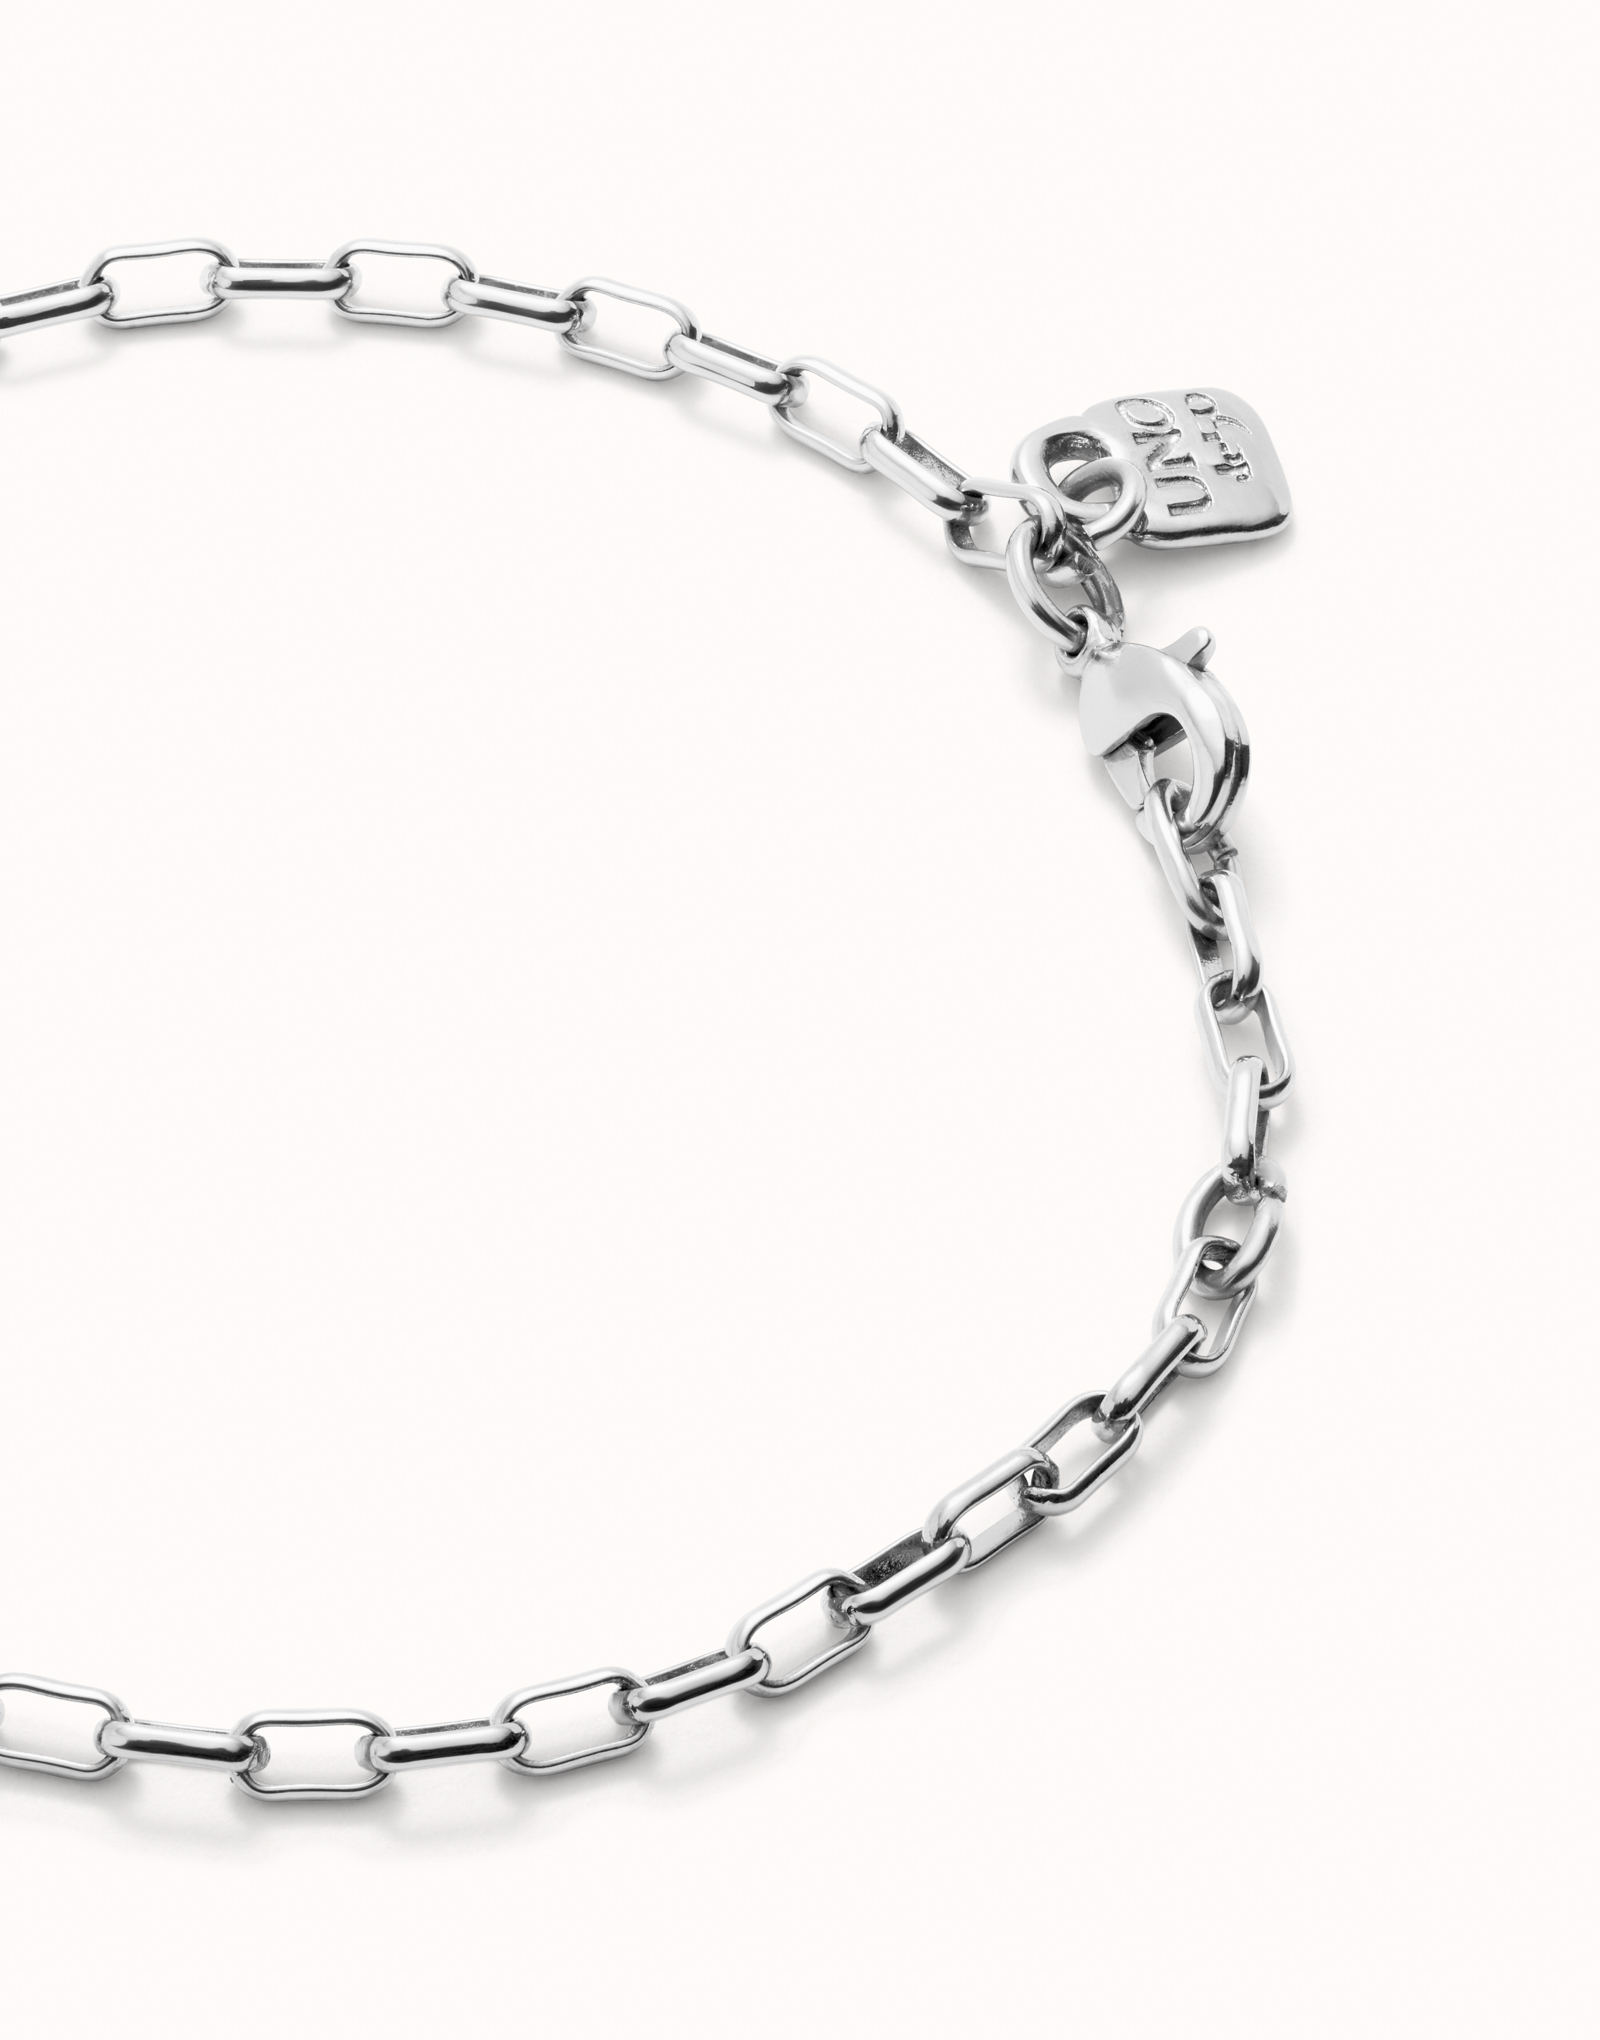 Bracciale con maglie medie placcato argento Sterling., Argent, large image number null